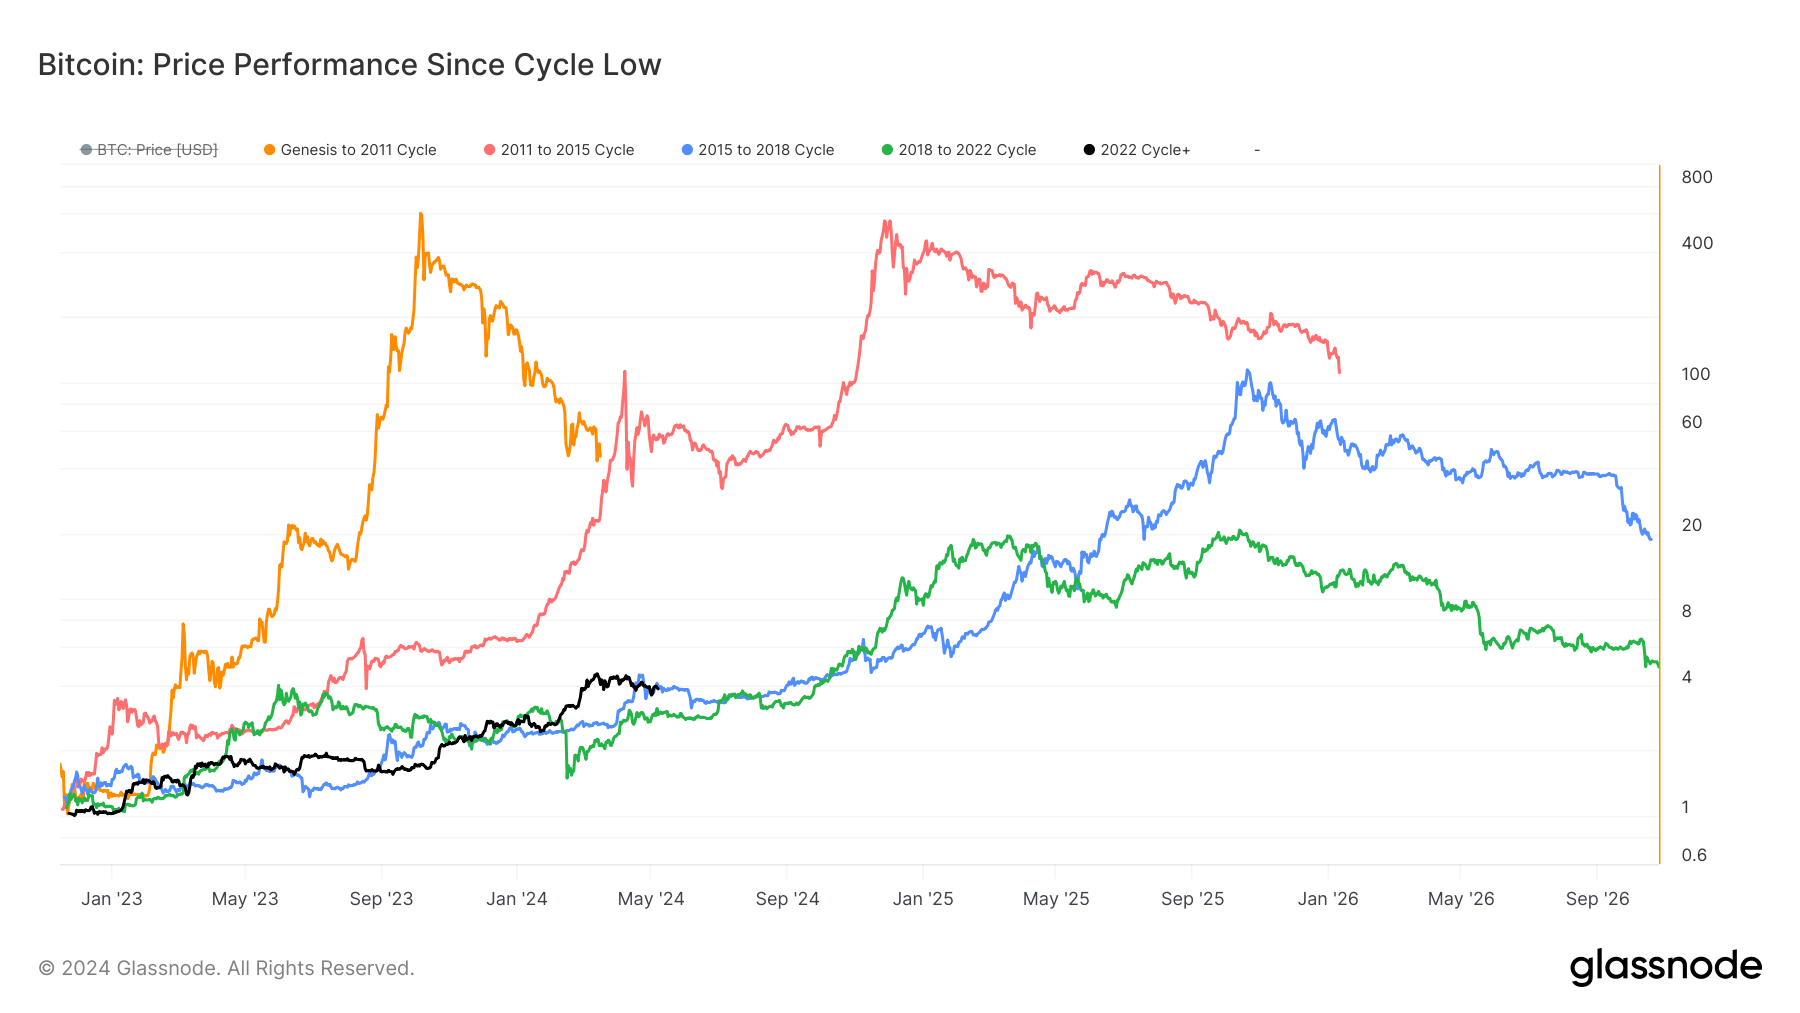 Bitcoin Price Performance Since Cycle Low: (Source: Glassnode)